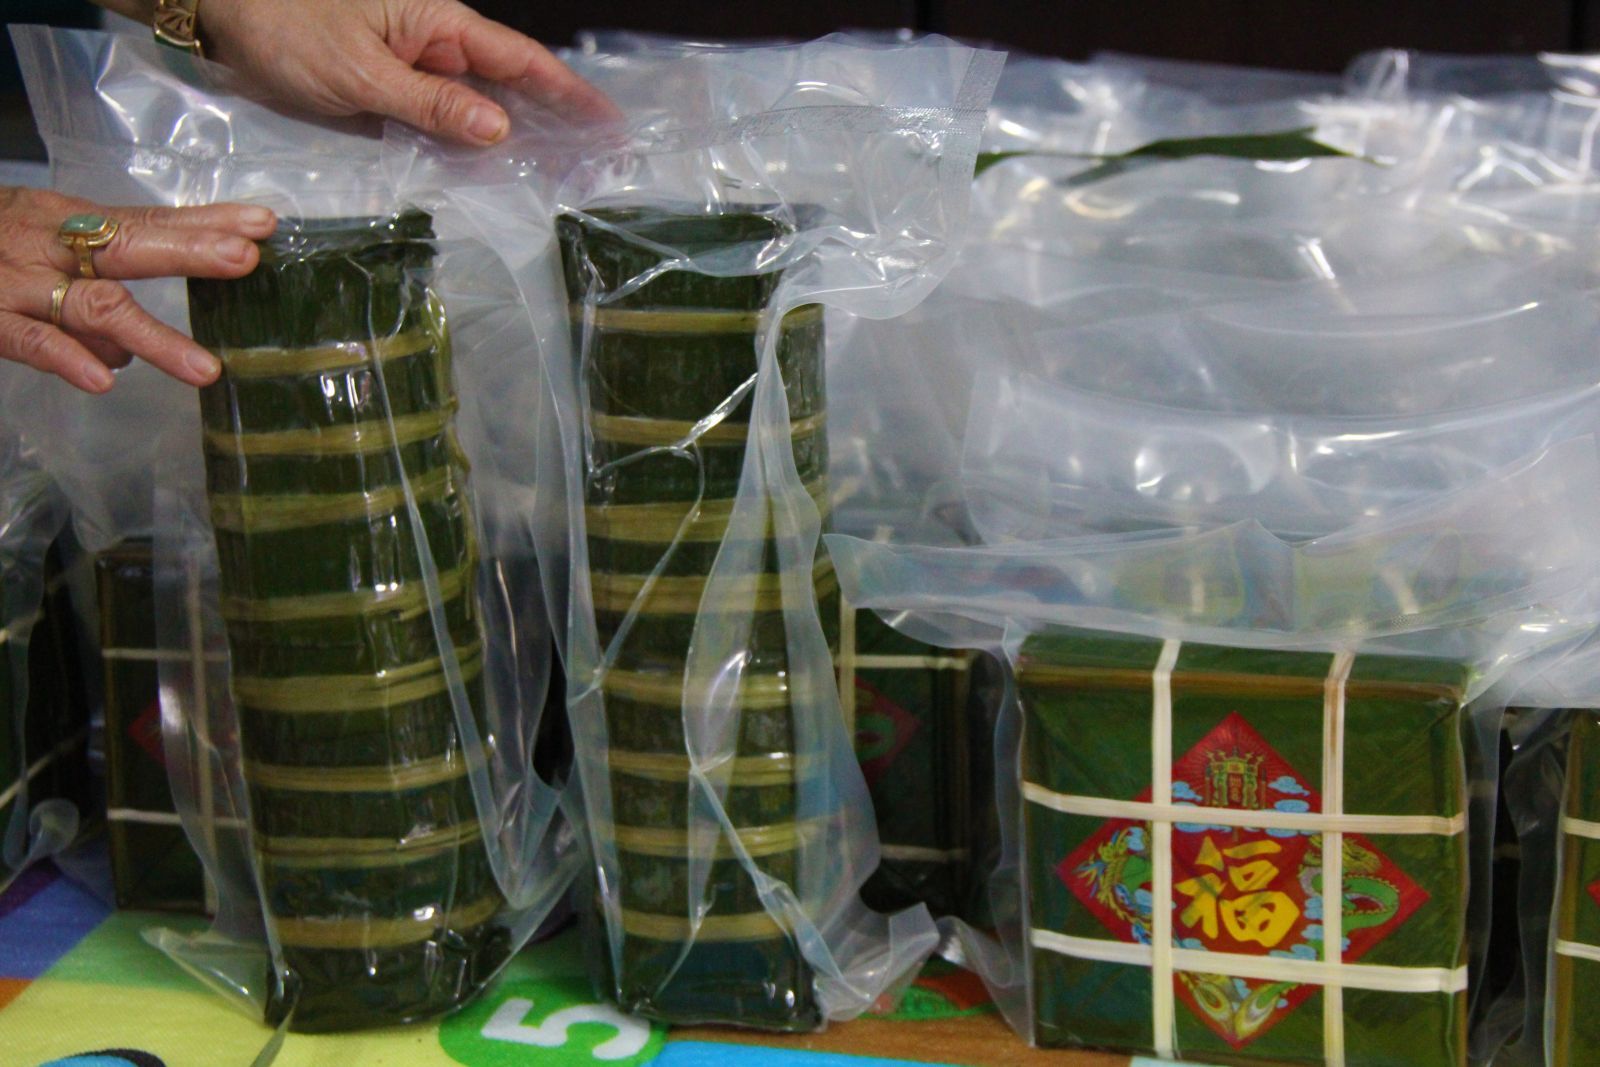 The final products of banh Tet and banh Chung are packed and delivered to Ho Chi Minh City to ship to the customers